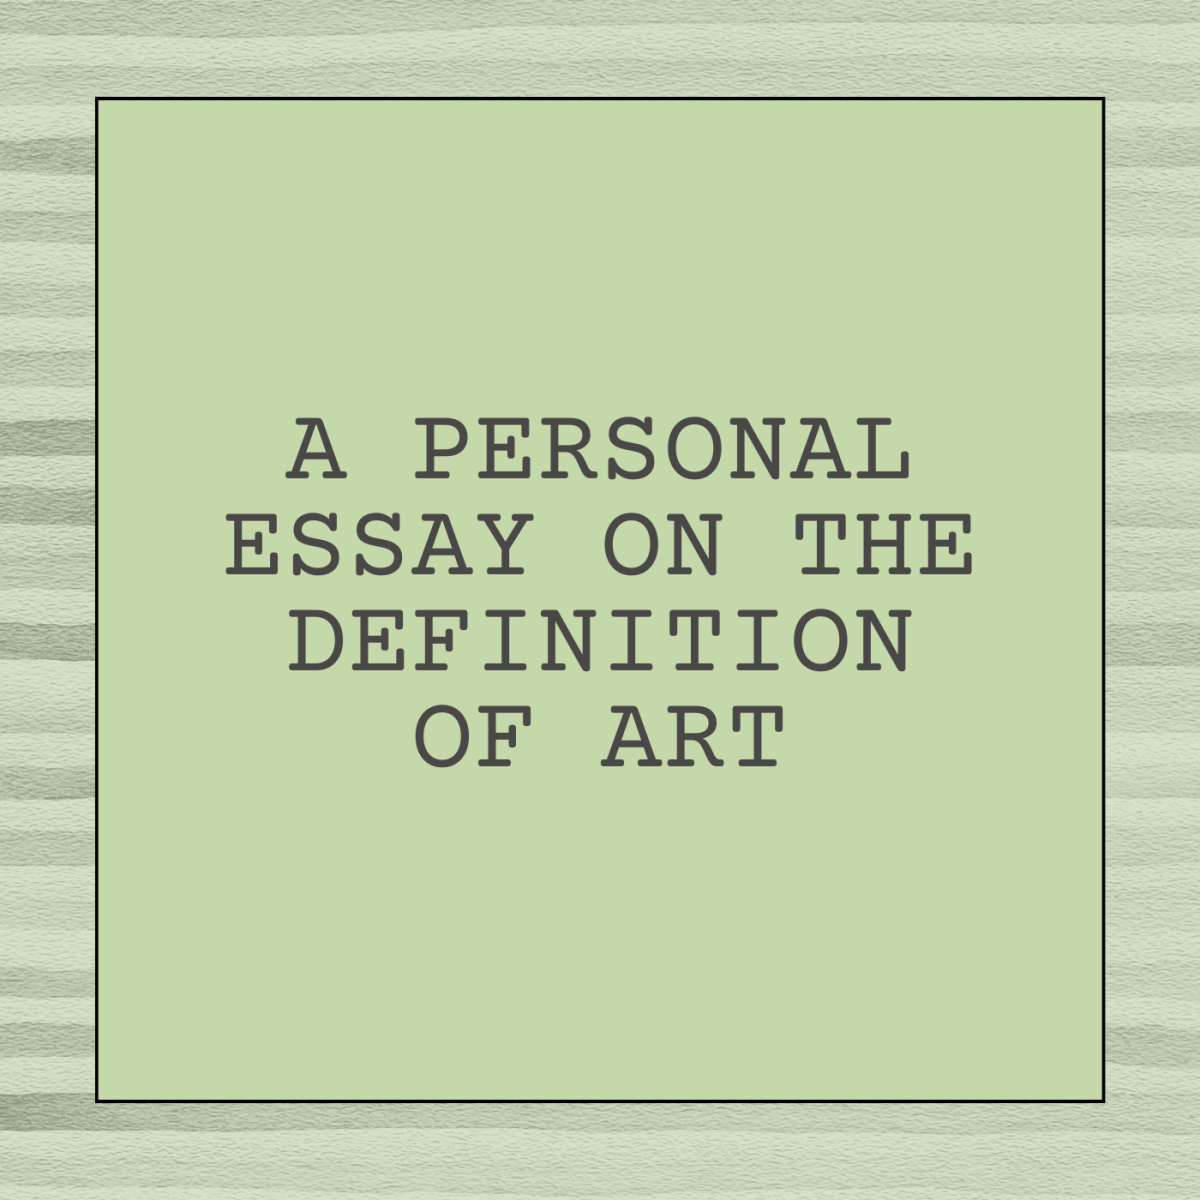 A Personal Essay on the Dfinition of Art